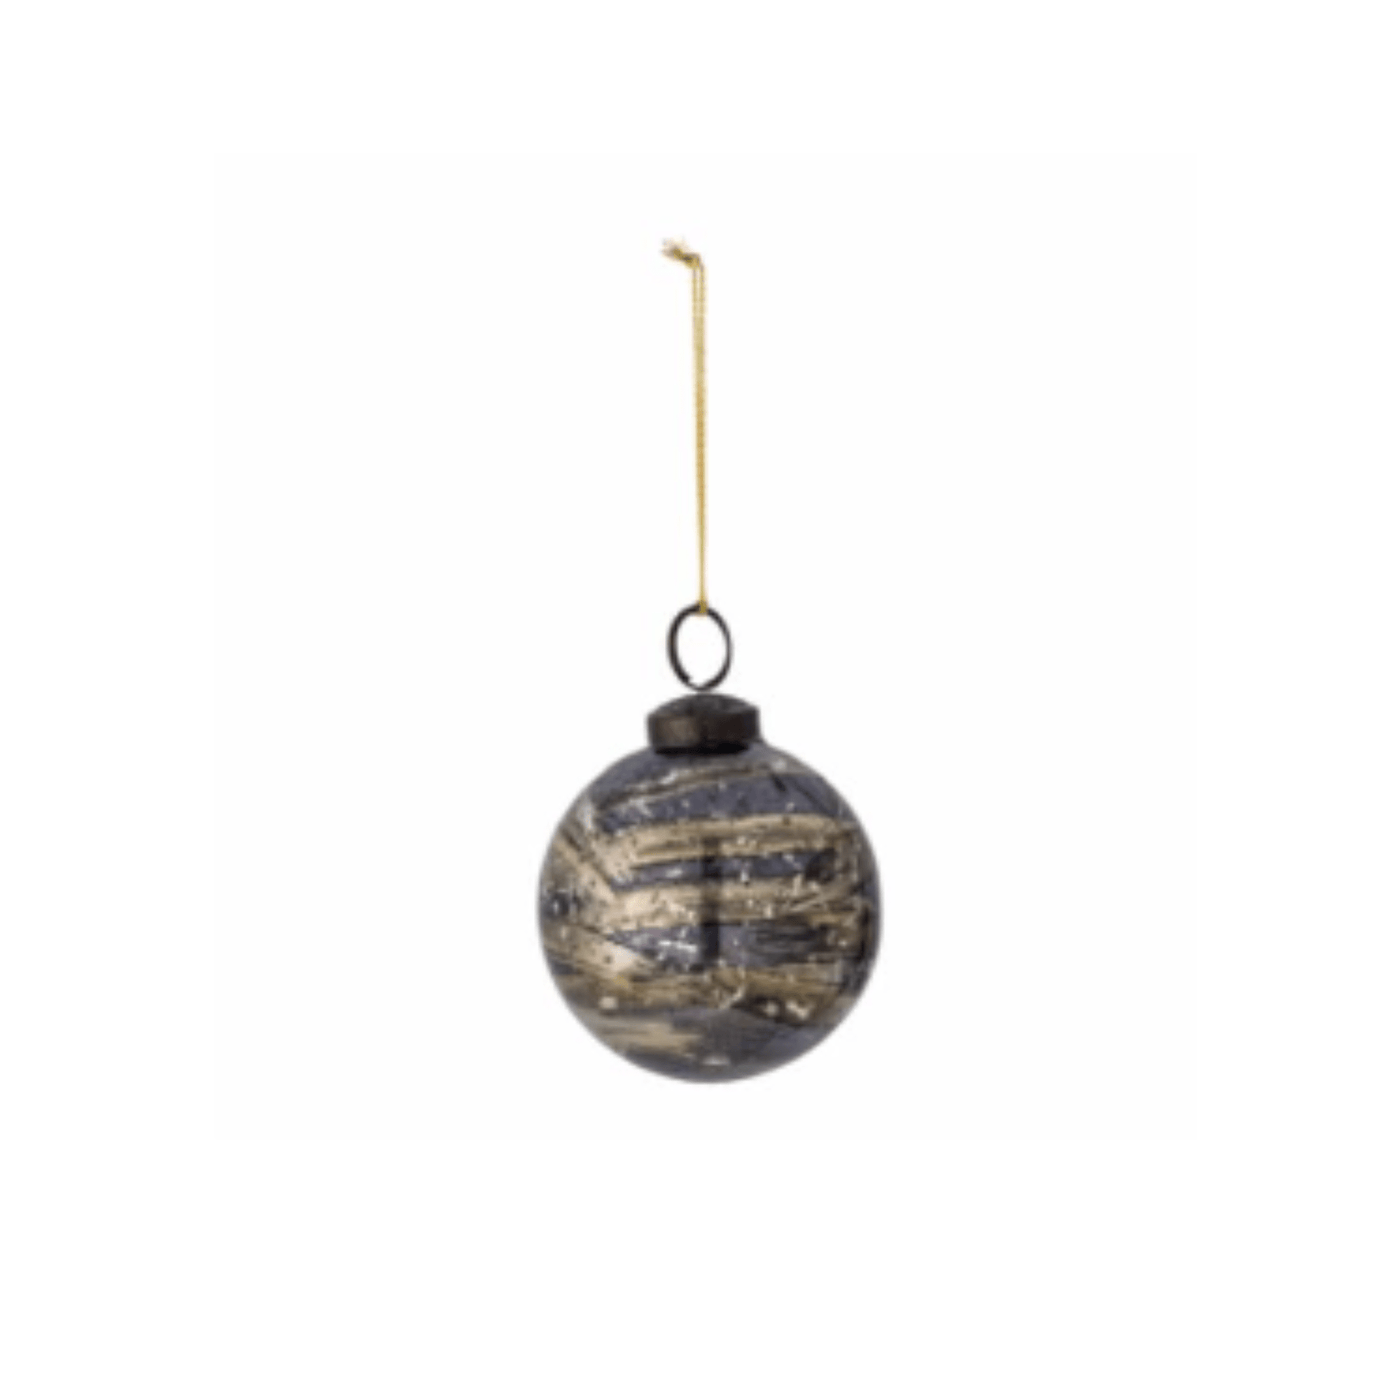 Bloomville Christmas Contes Ornament, Grey,